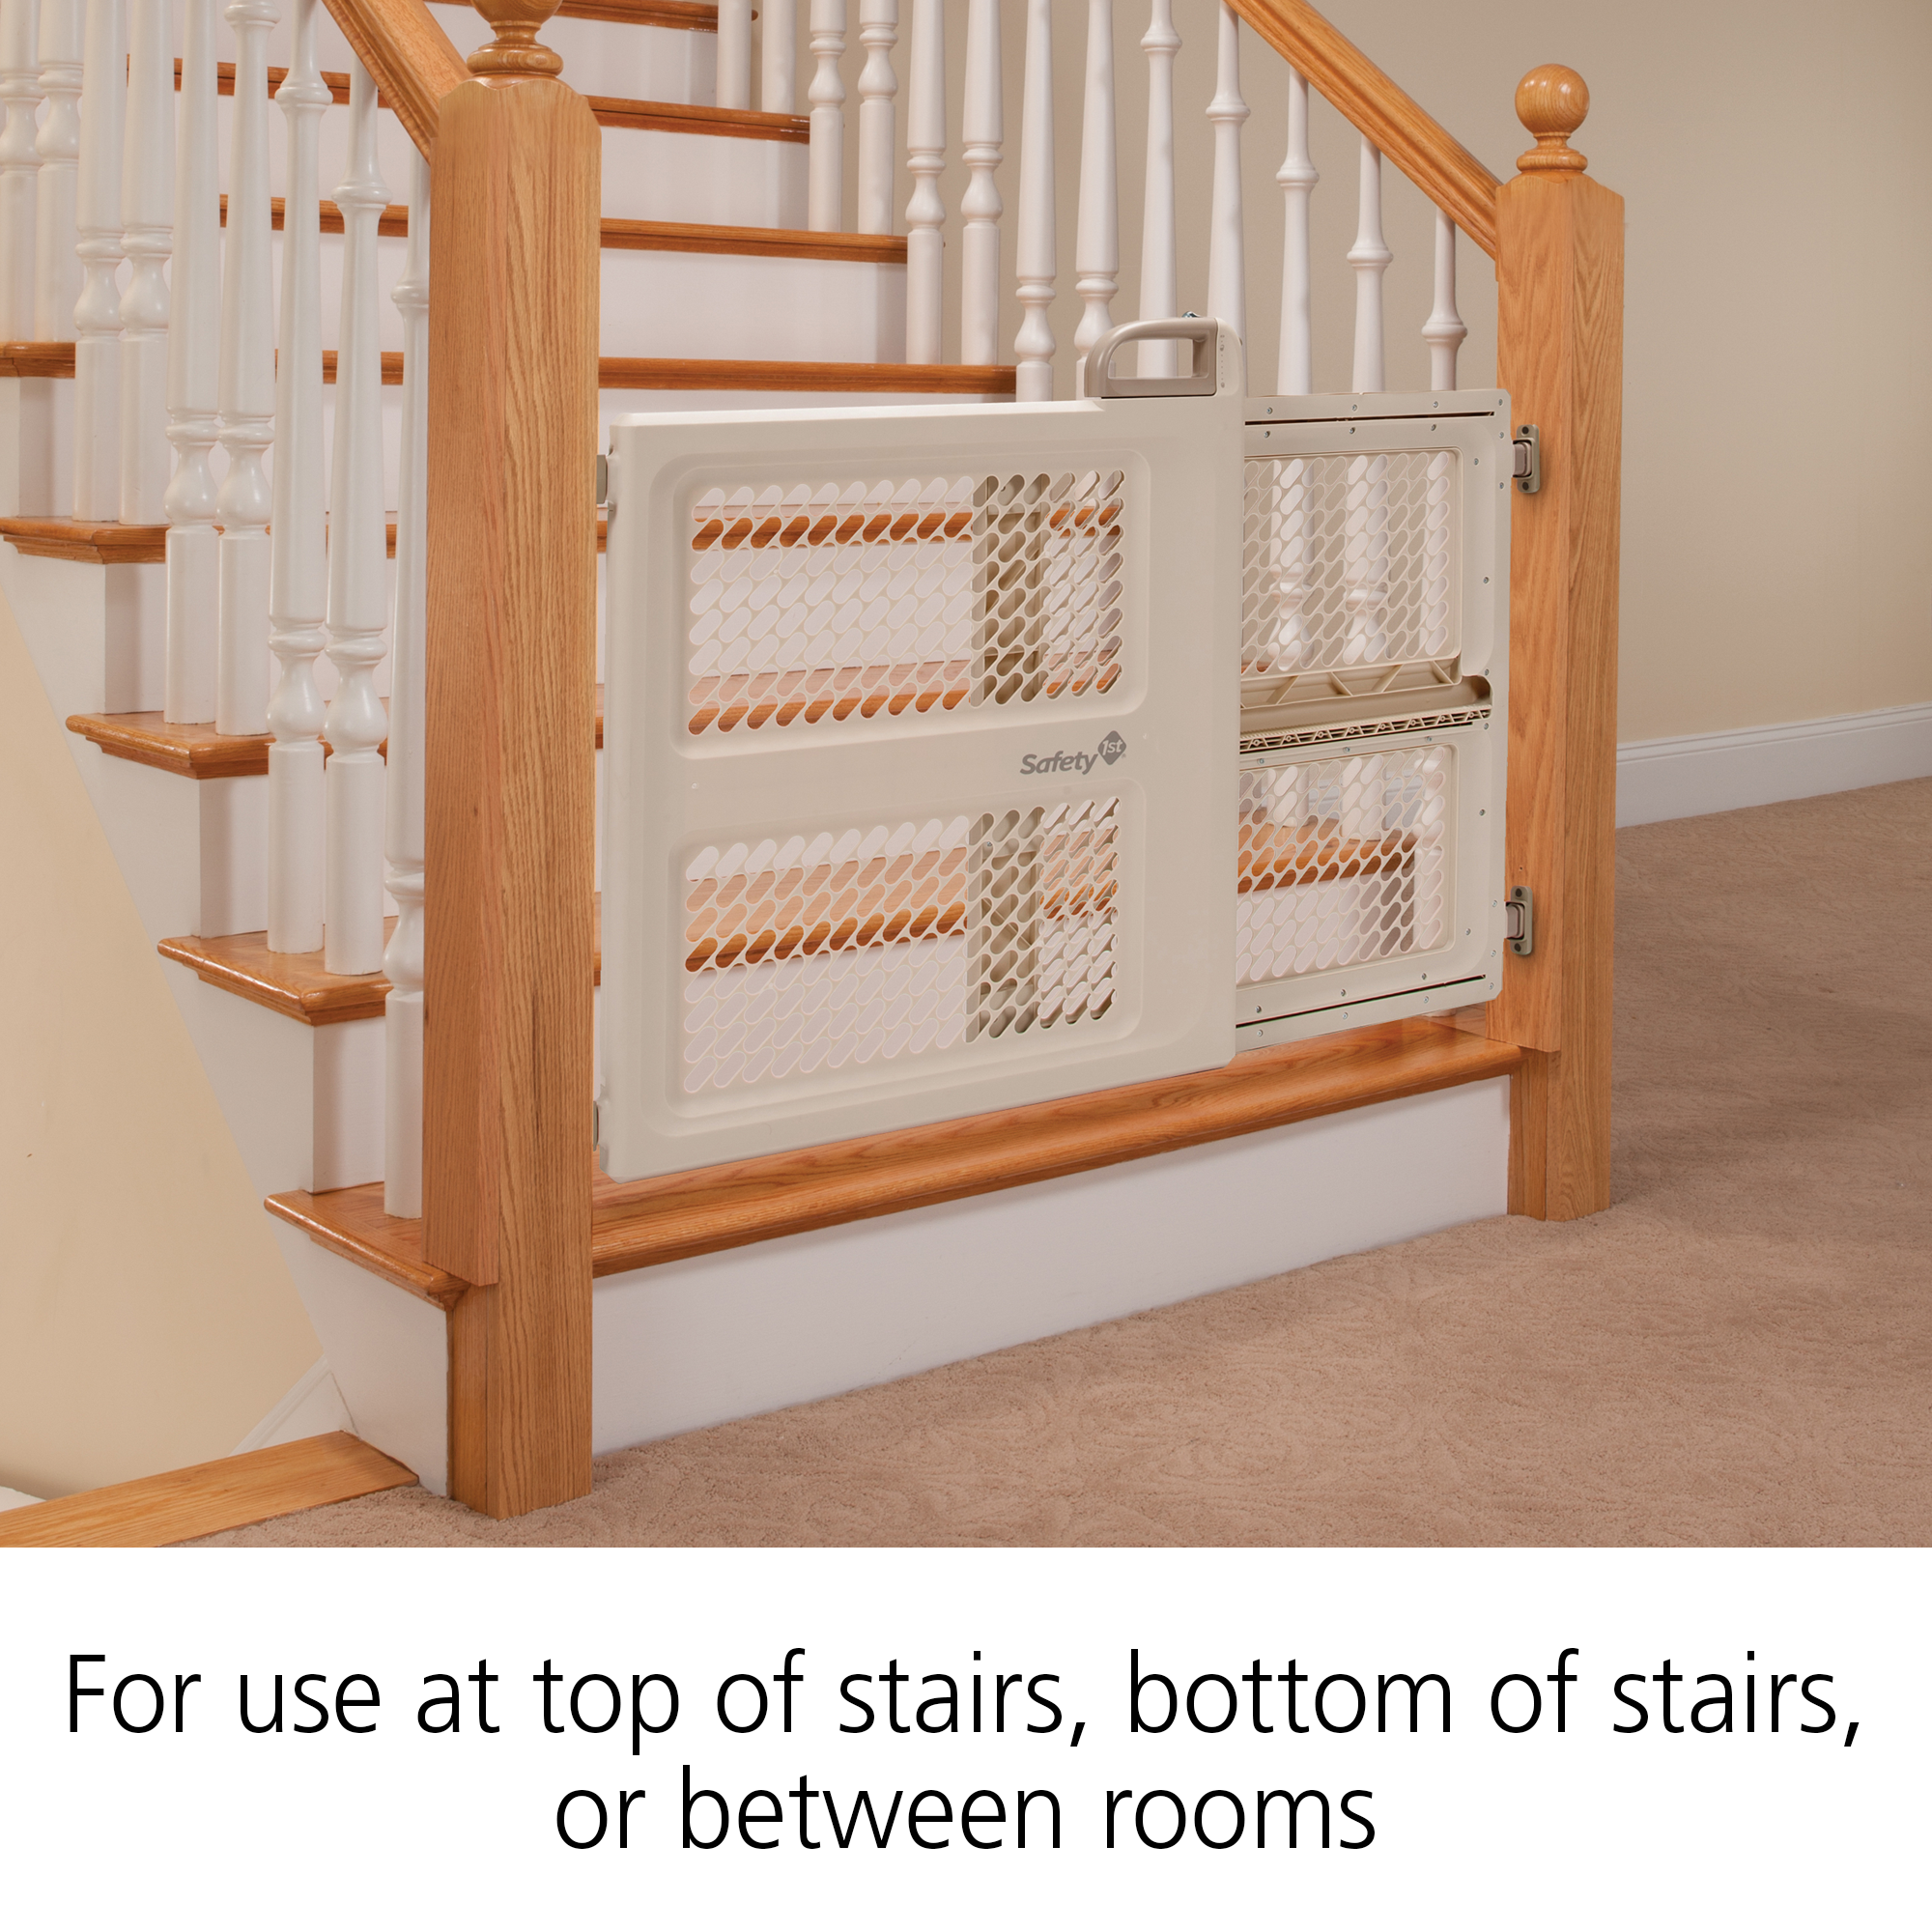 For use at top of stairs, bottom of stairs or between rooms.  Safety gate is shown properly installed at the bottom of the stairs in a home.